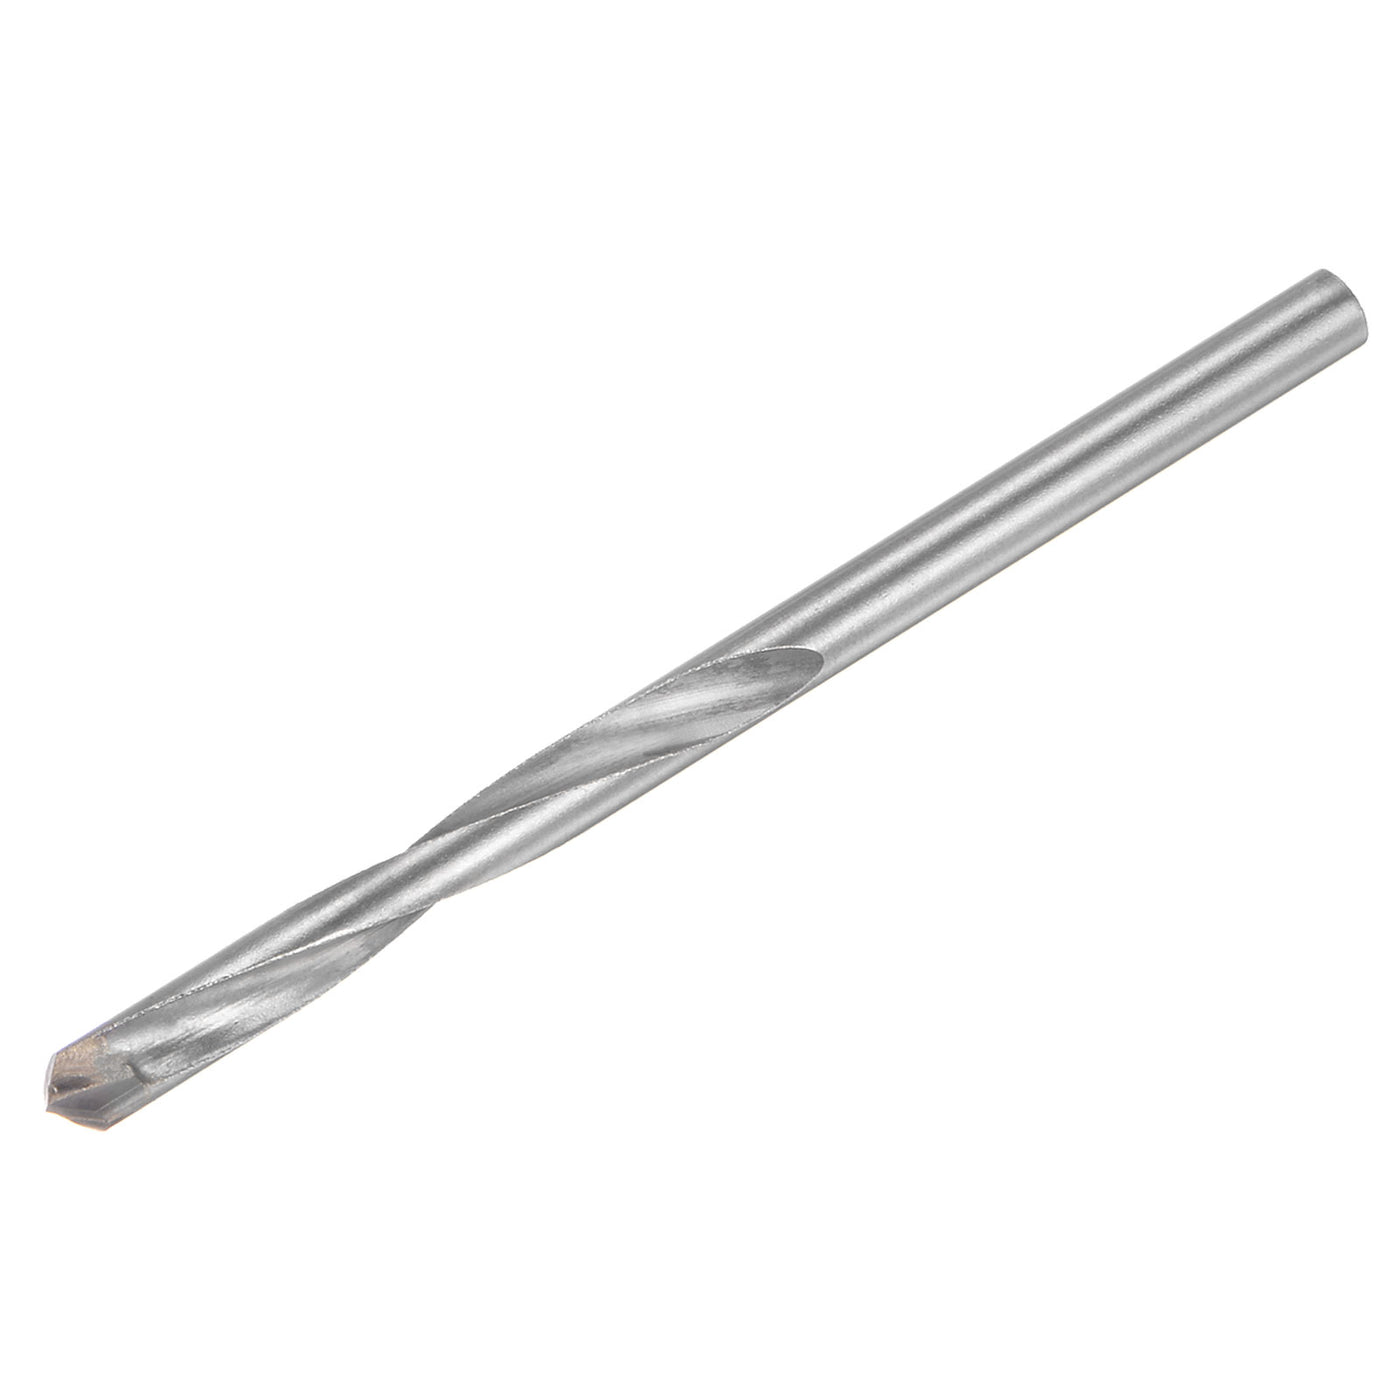 uxcell Uxcell 6mm Cutting Dia Round Shank Cemented Carbide Twist Drill Bit, 100mm Length